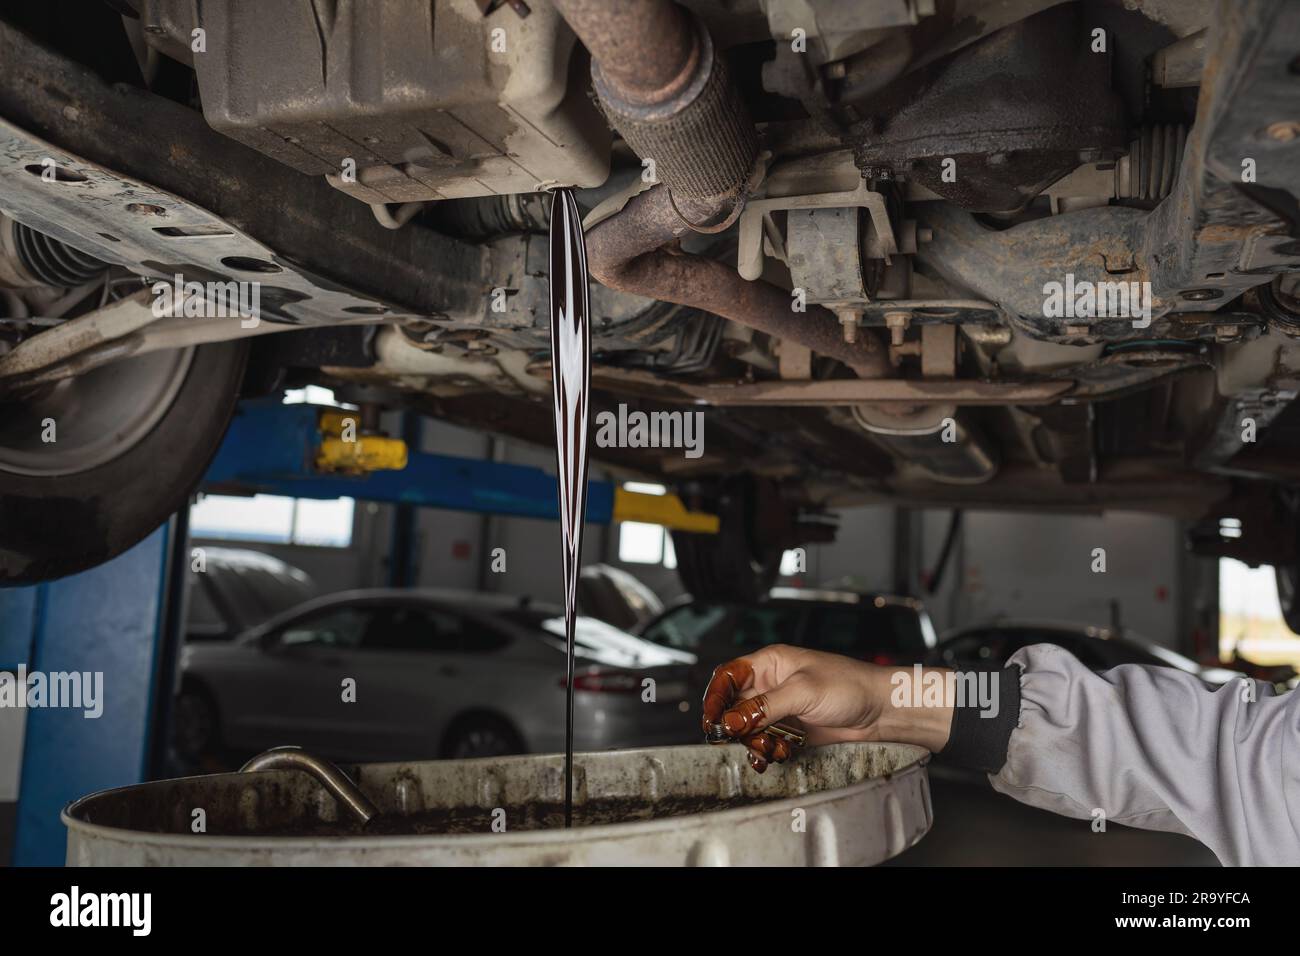 Auto mechanic drains old used engine oil at a service station, scheduled service maintenance of a passenger car Stock Photo